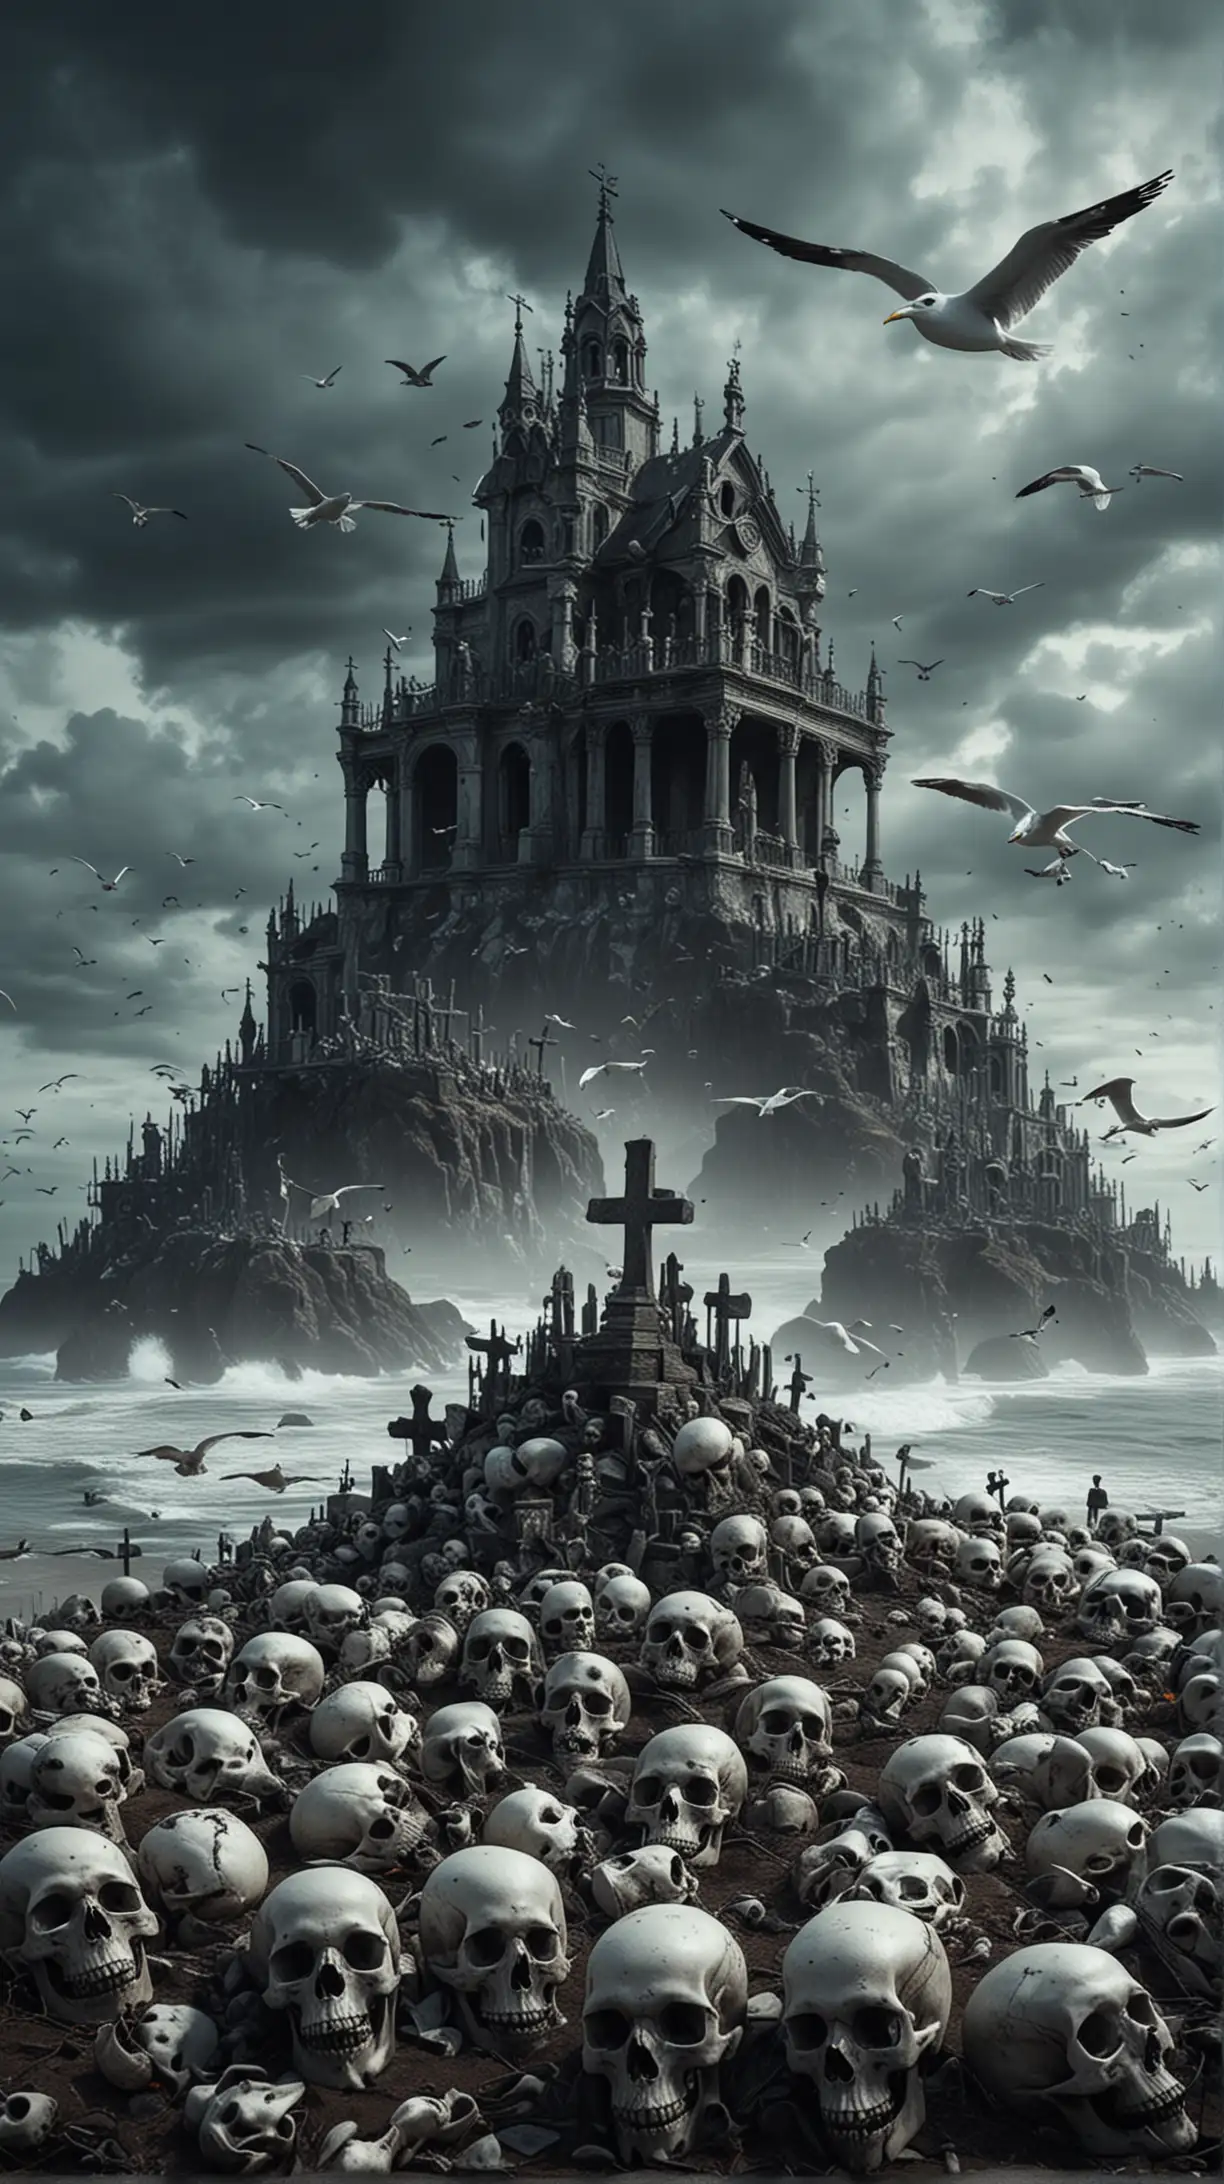 Make a mysterious place with full of skulls and seagulls sits on top of them. Make it look like a graveyard, 4k quality photo, amazing clear picture 